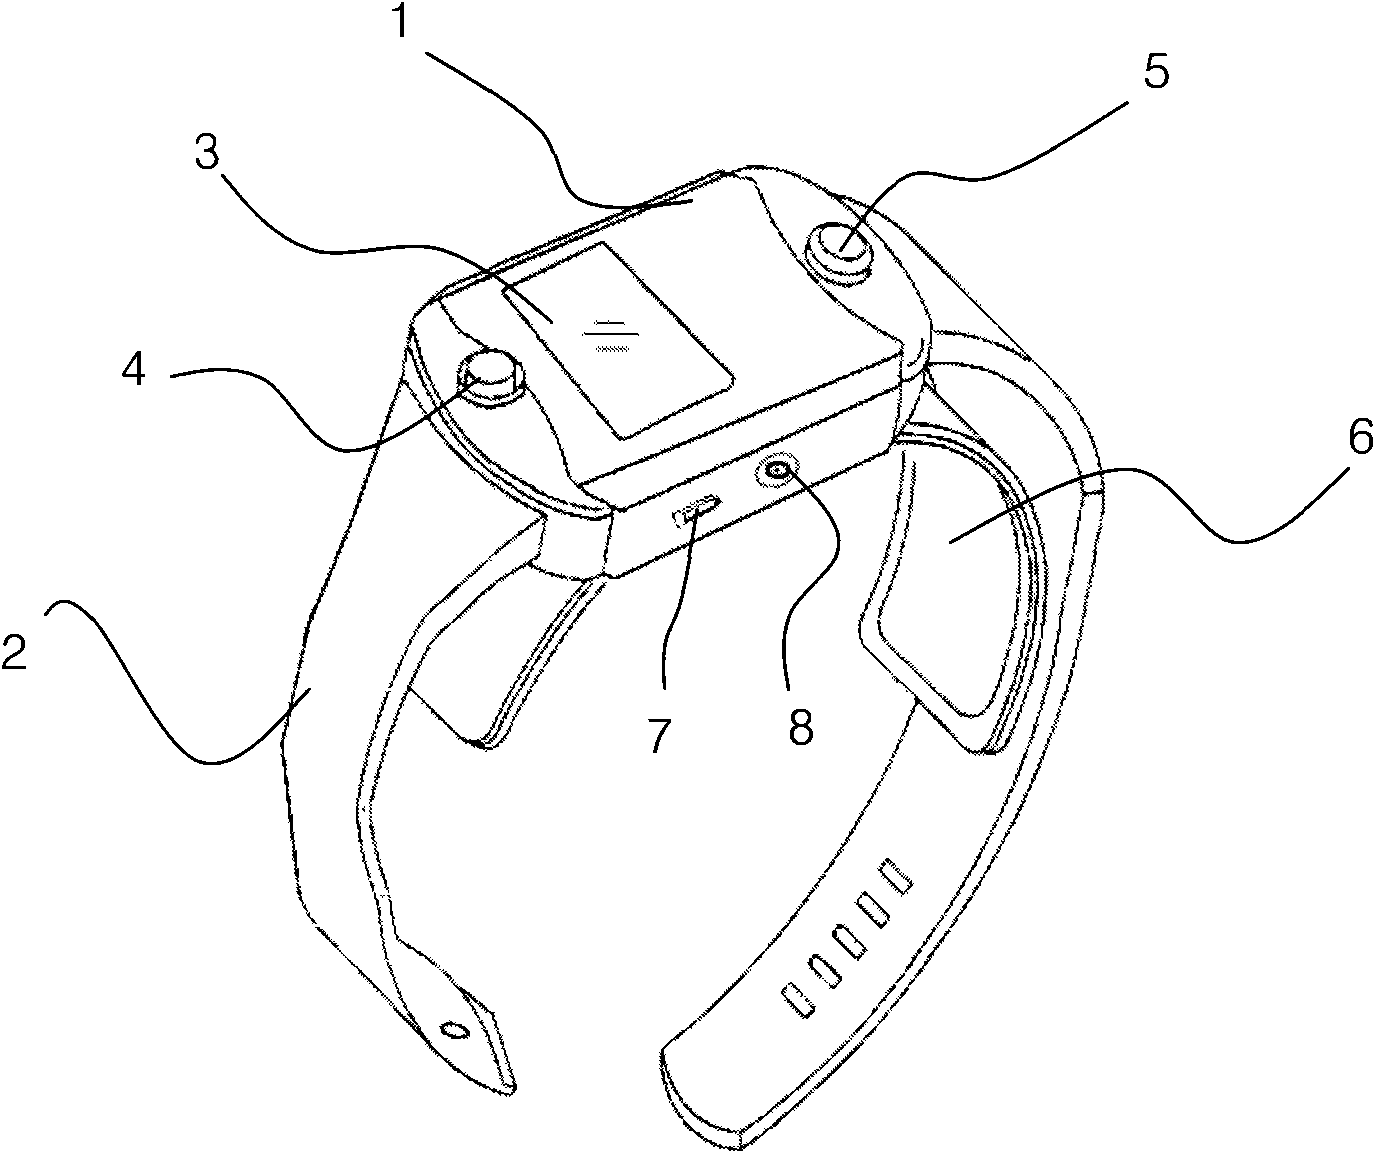 Device for monitoring blood pressure of witness in court